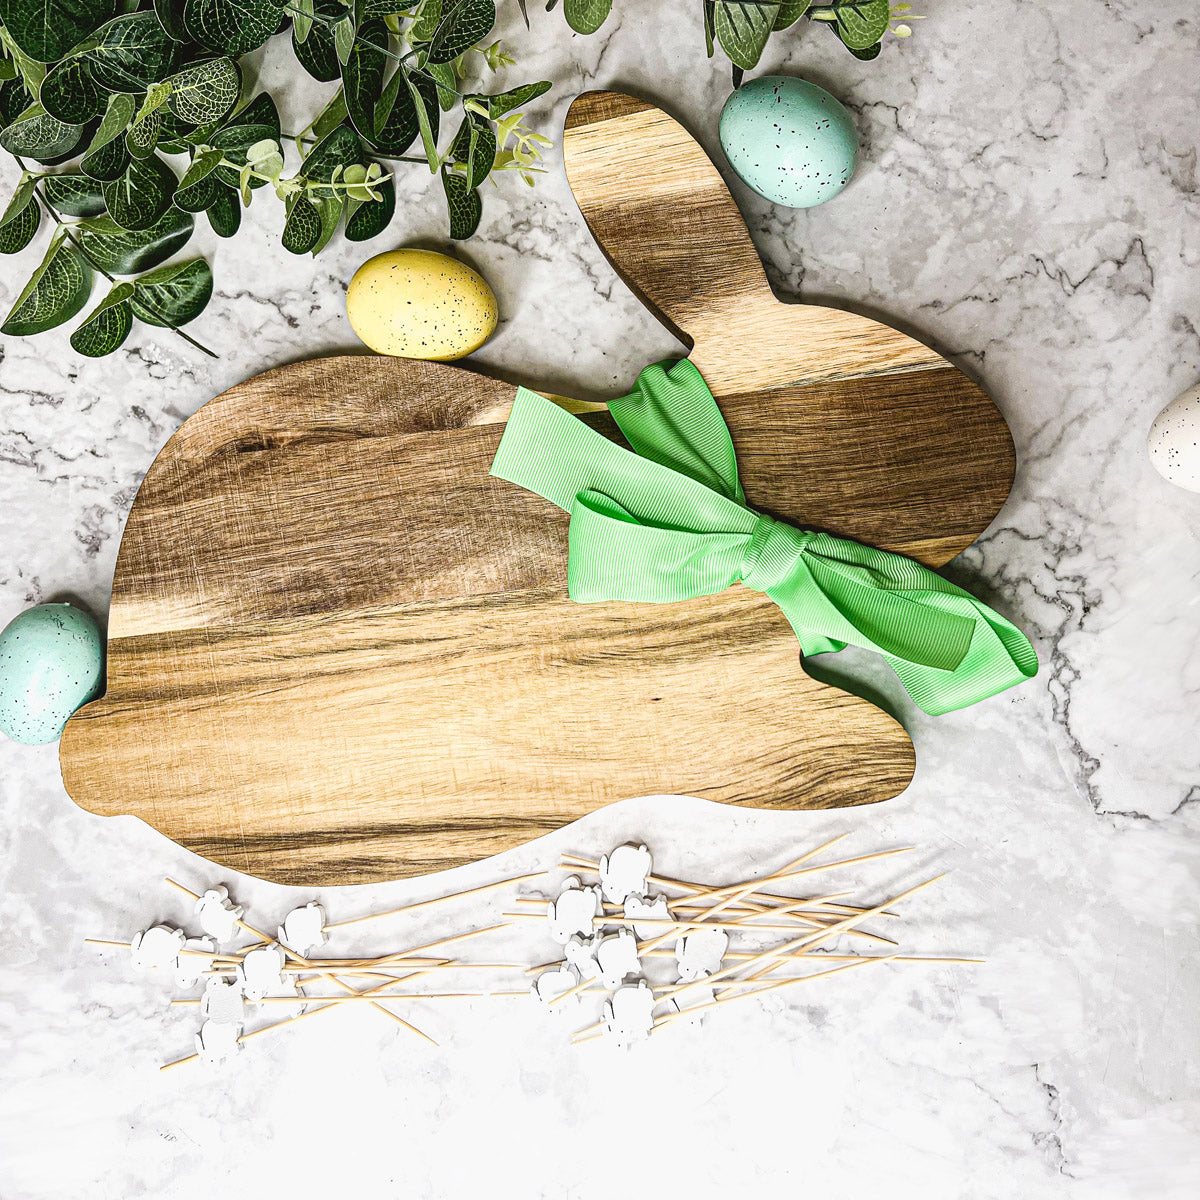 SPring Charcuterie Boards and Cooking Sets, Unique Easter Kitchen Gift Ideas